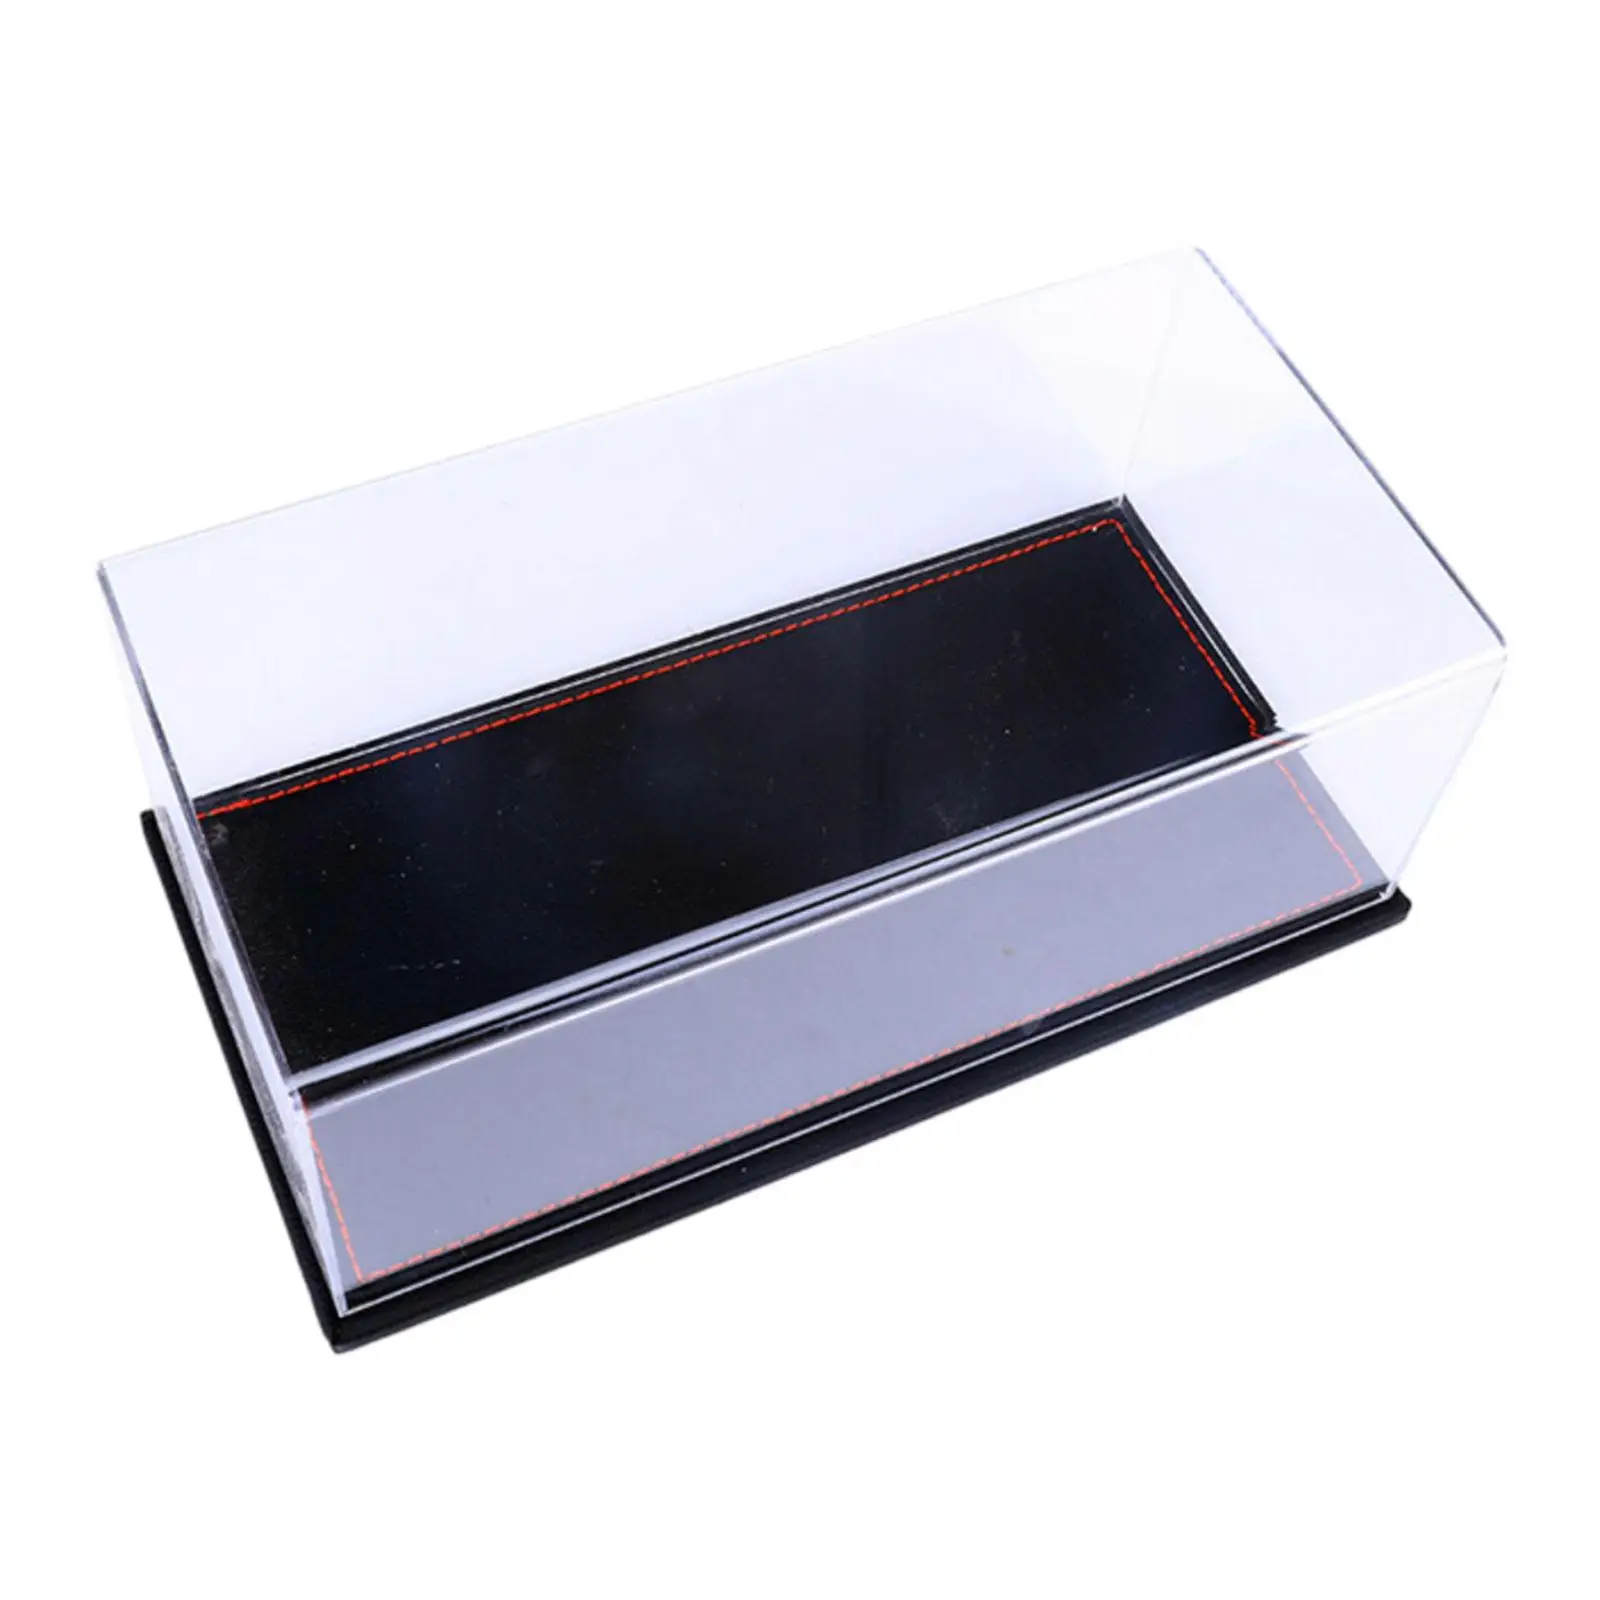 Acrylic Display Case Transparent Display Box with PU Leather Base Dustproof Storage for 1:24 Model Cars Action Figure